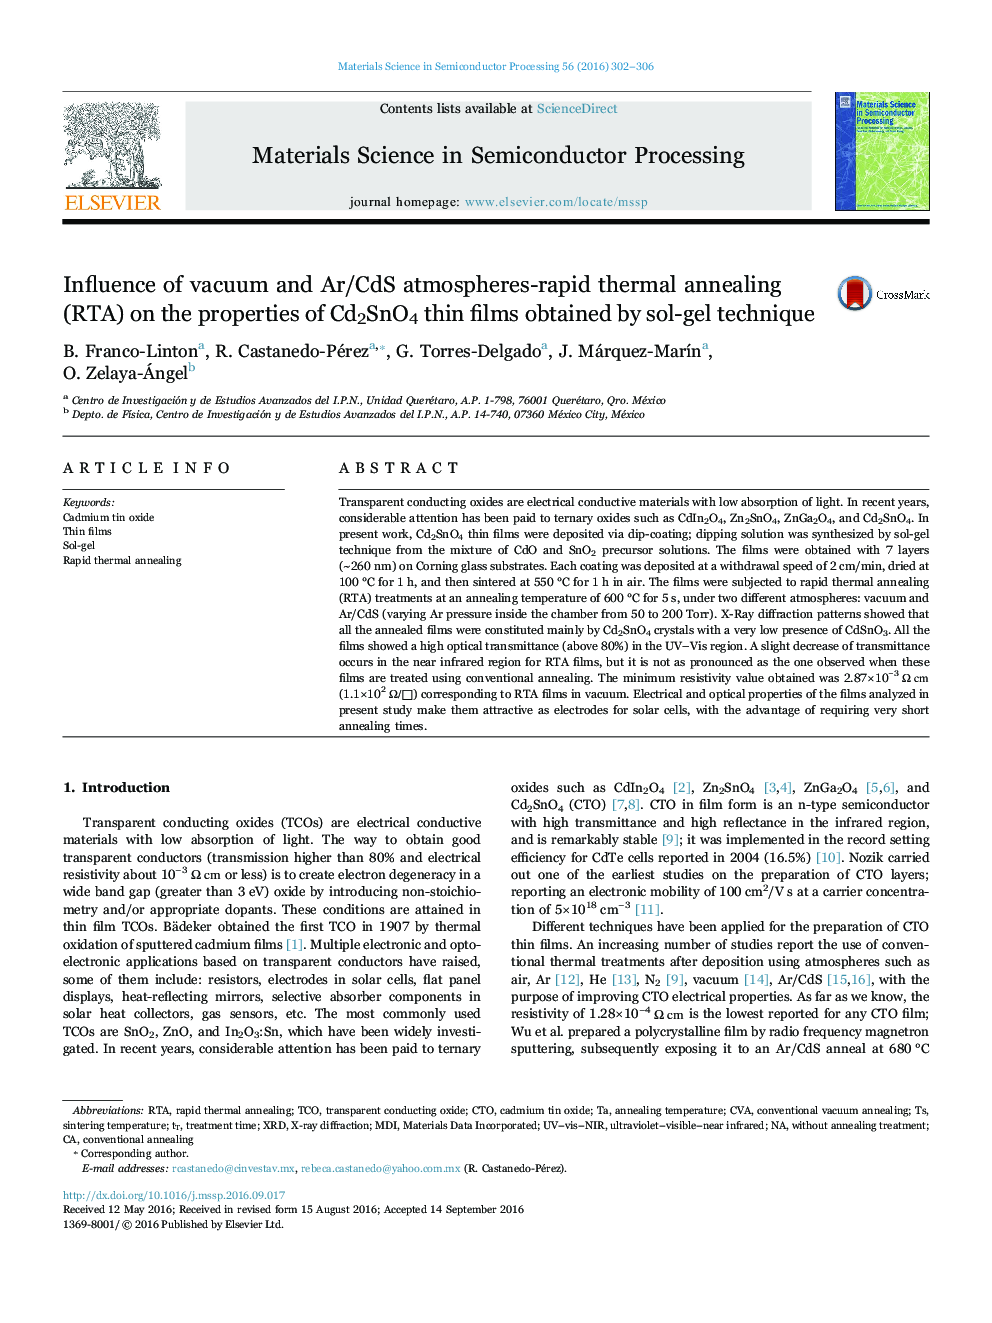 Influence of vacuum and Ar/CdS atmospheres-rapid thermal annealing (RTA) on the properties of Cd2SnO4 thin films obtained by sol-gel technique